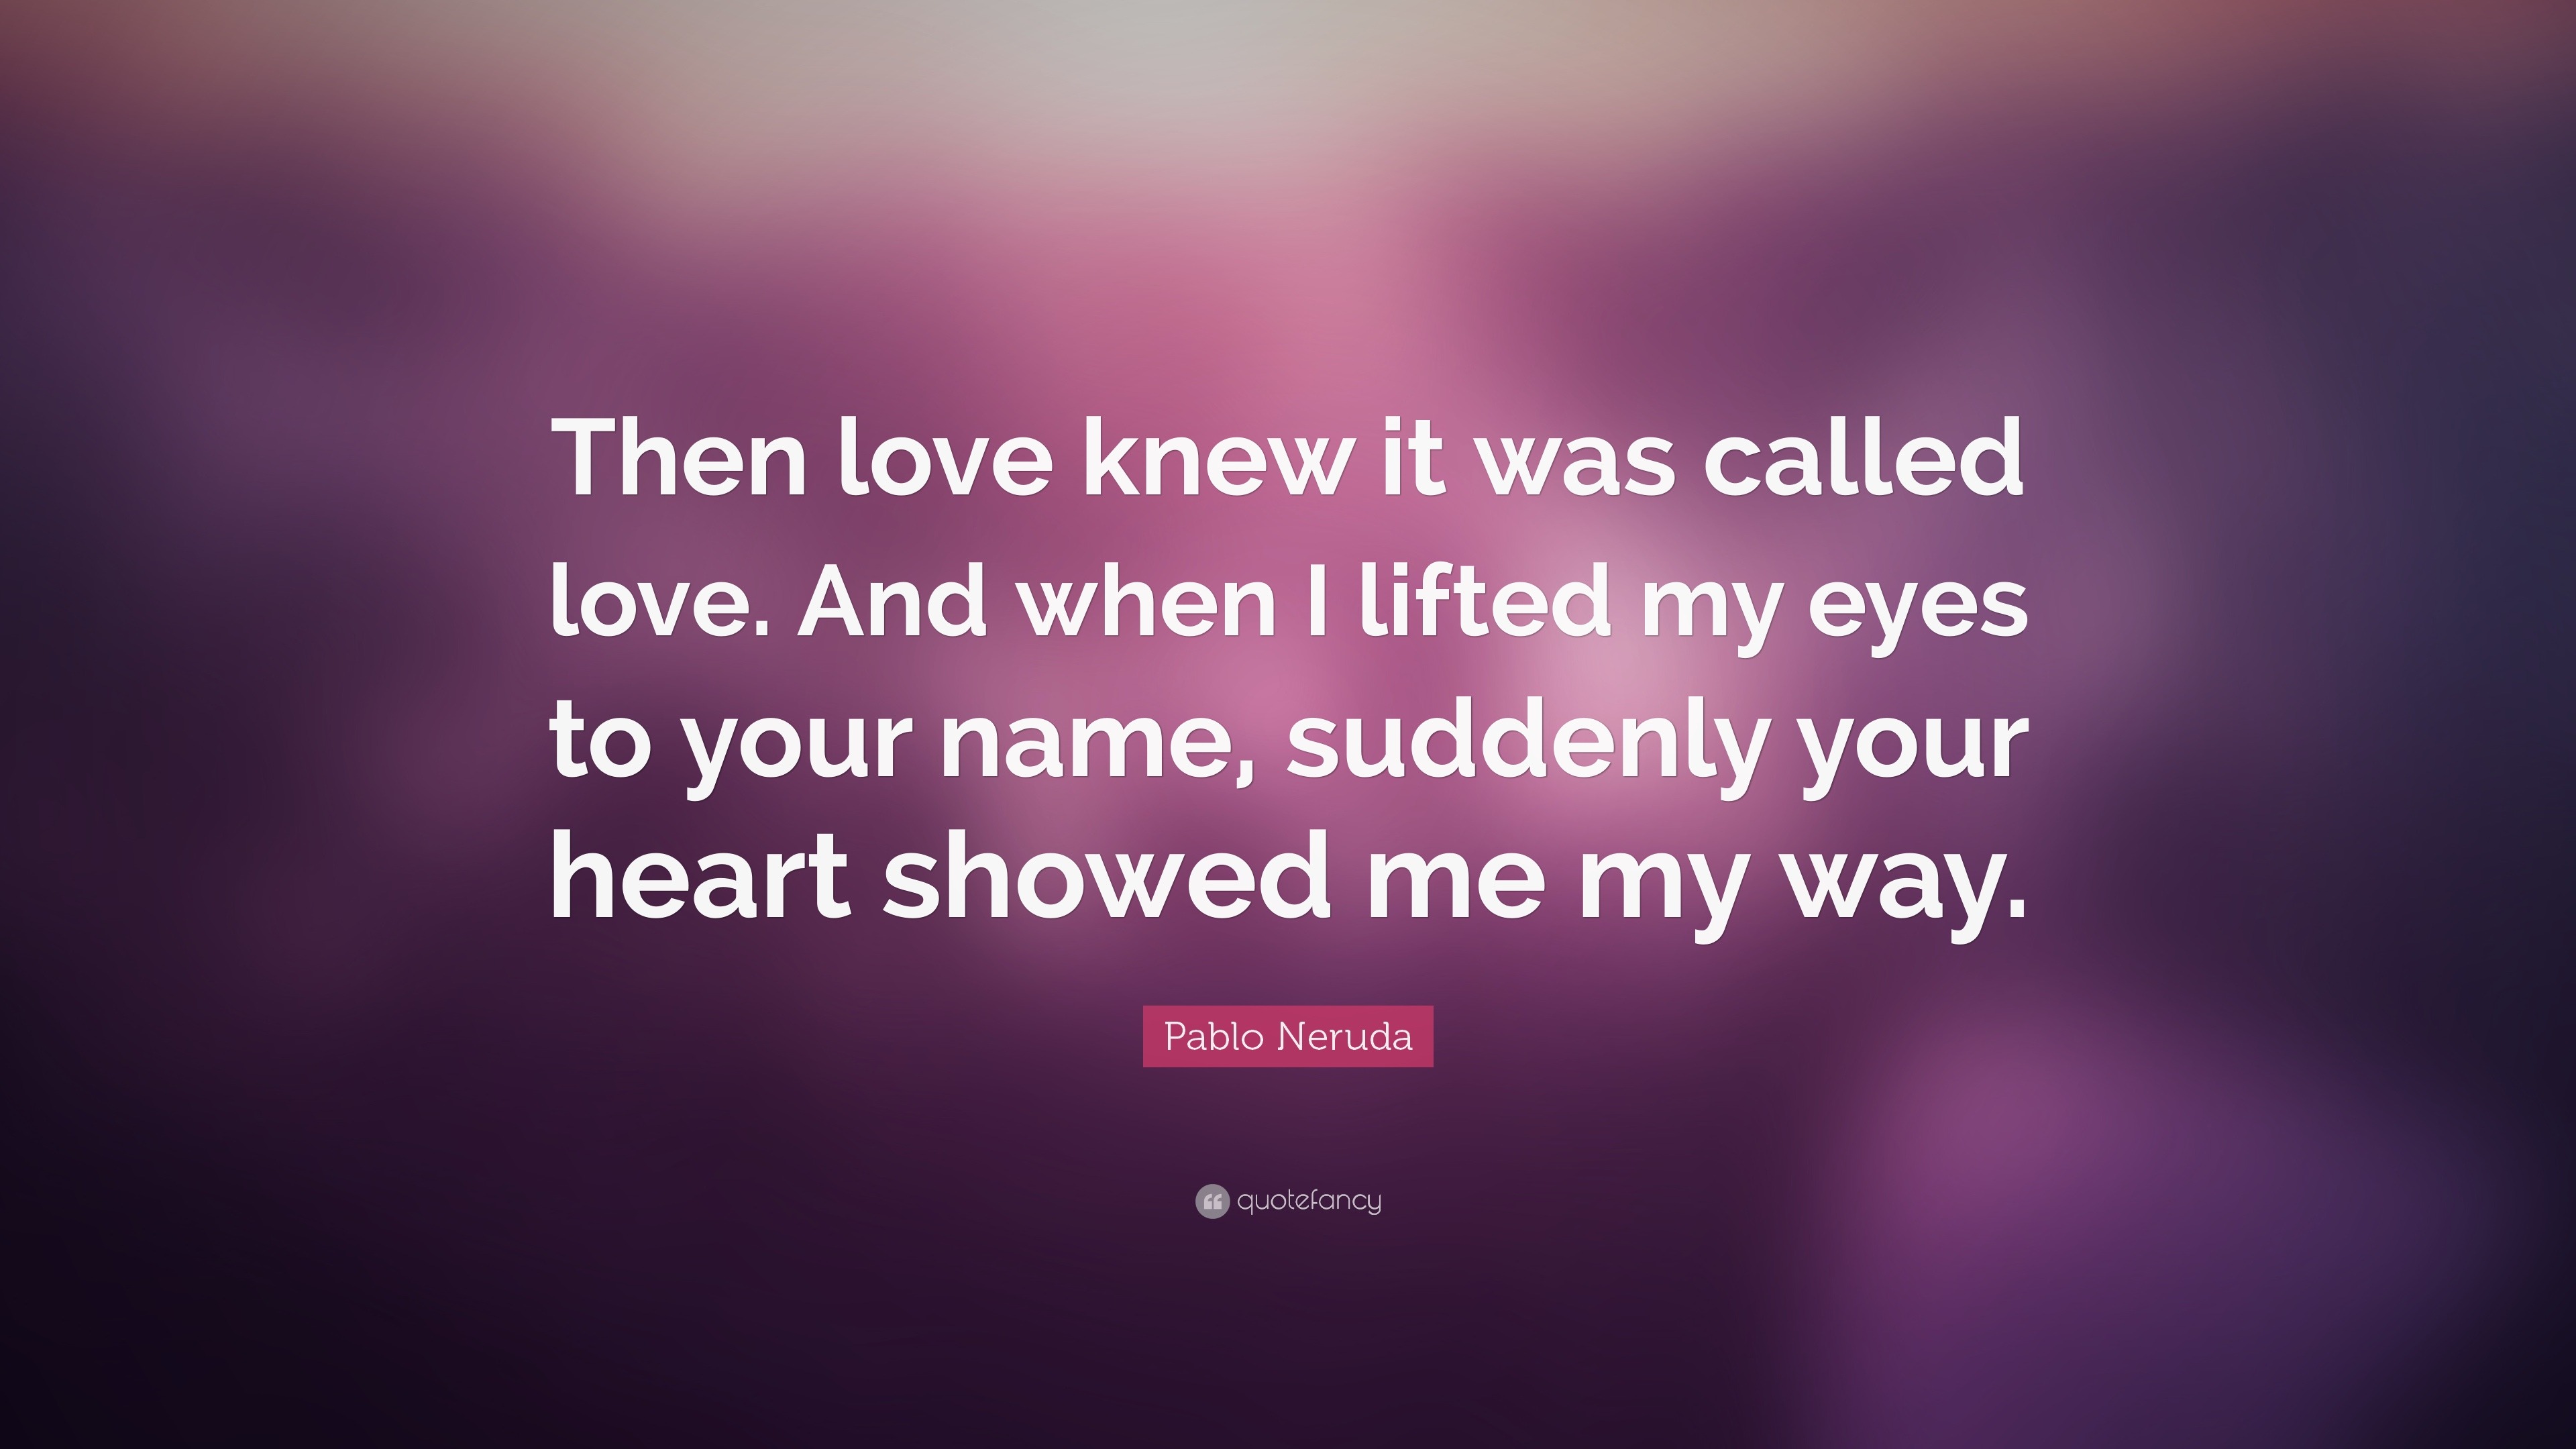 Pablo Neruda Quote: “Then love knew it was called love. And when I ...